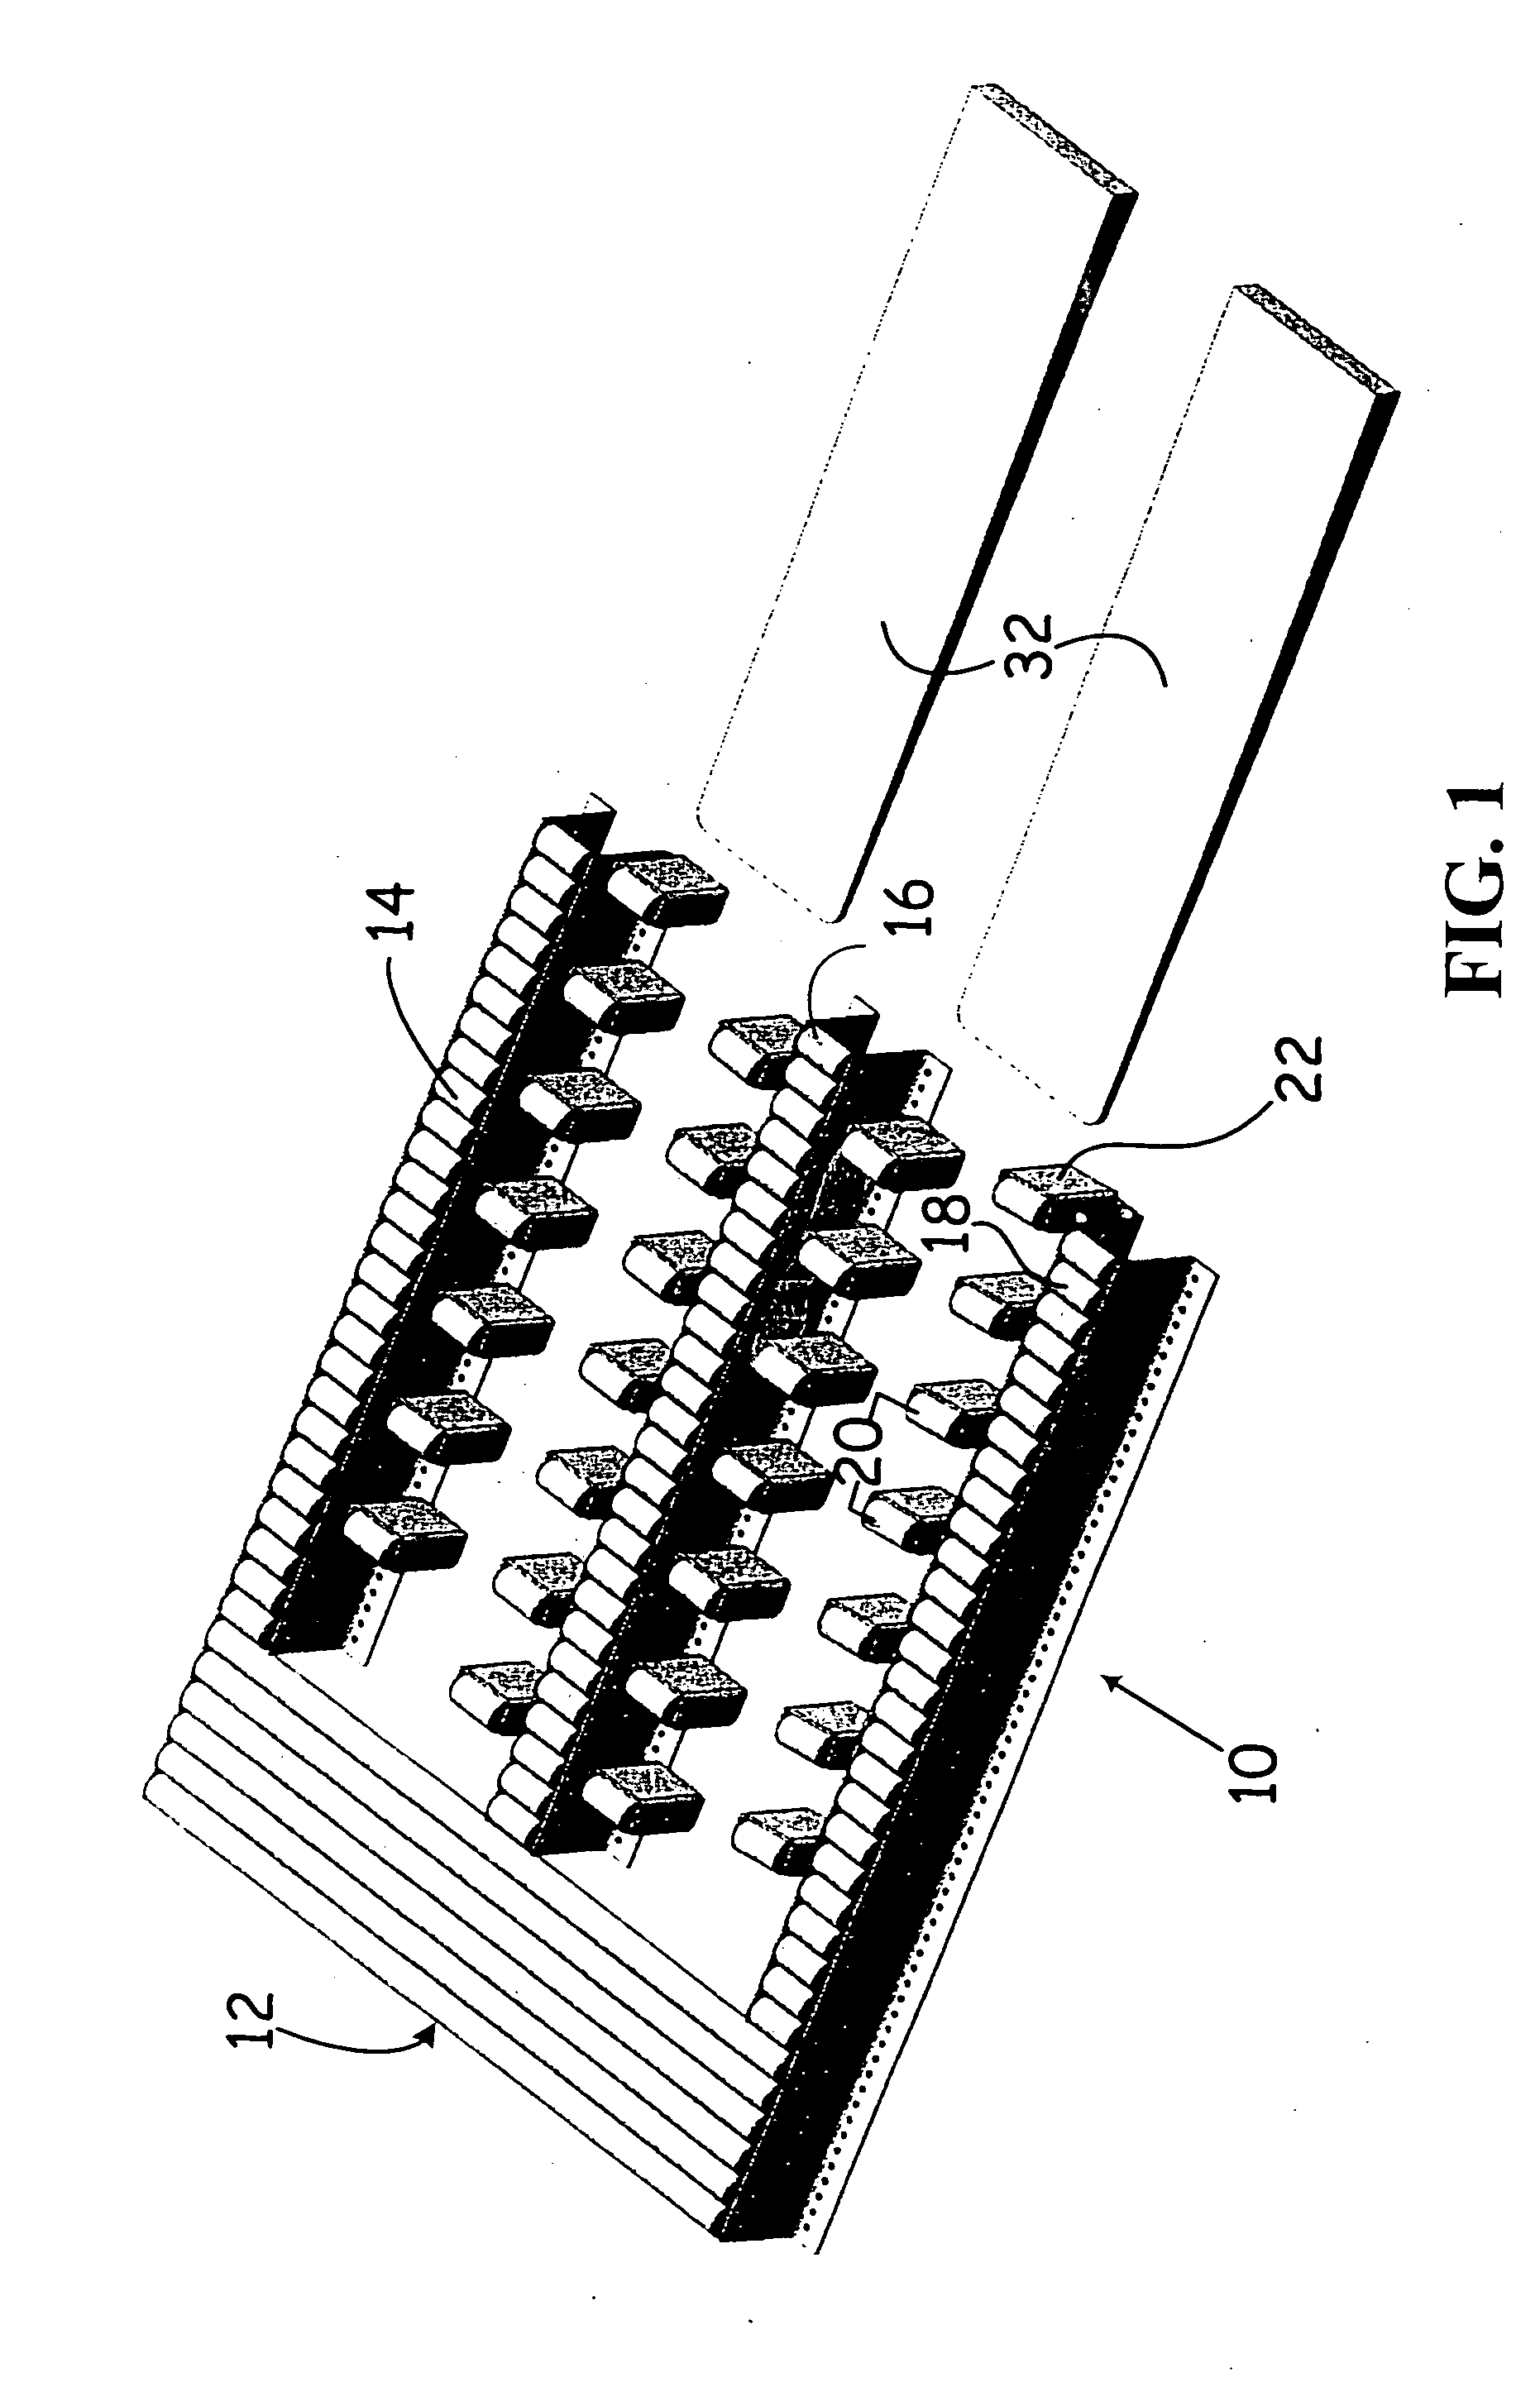 Conveyor system load transfer devices